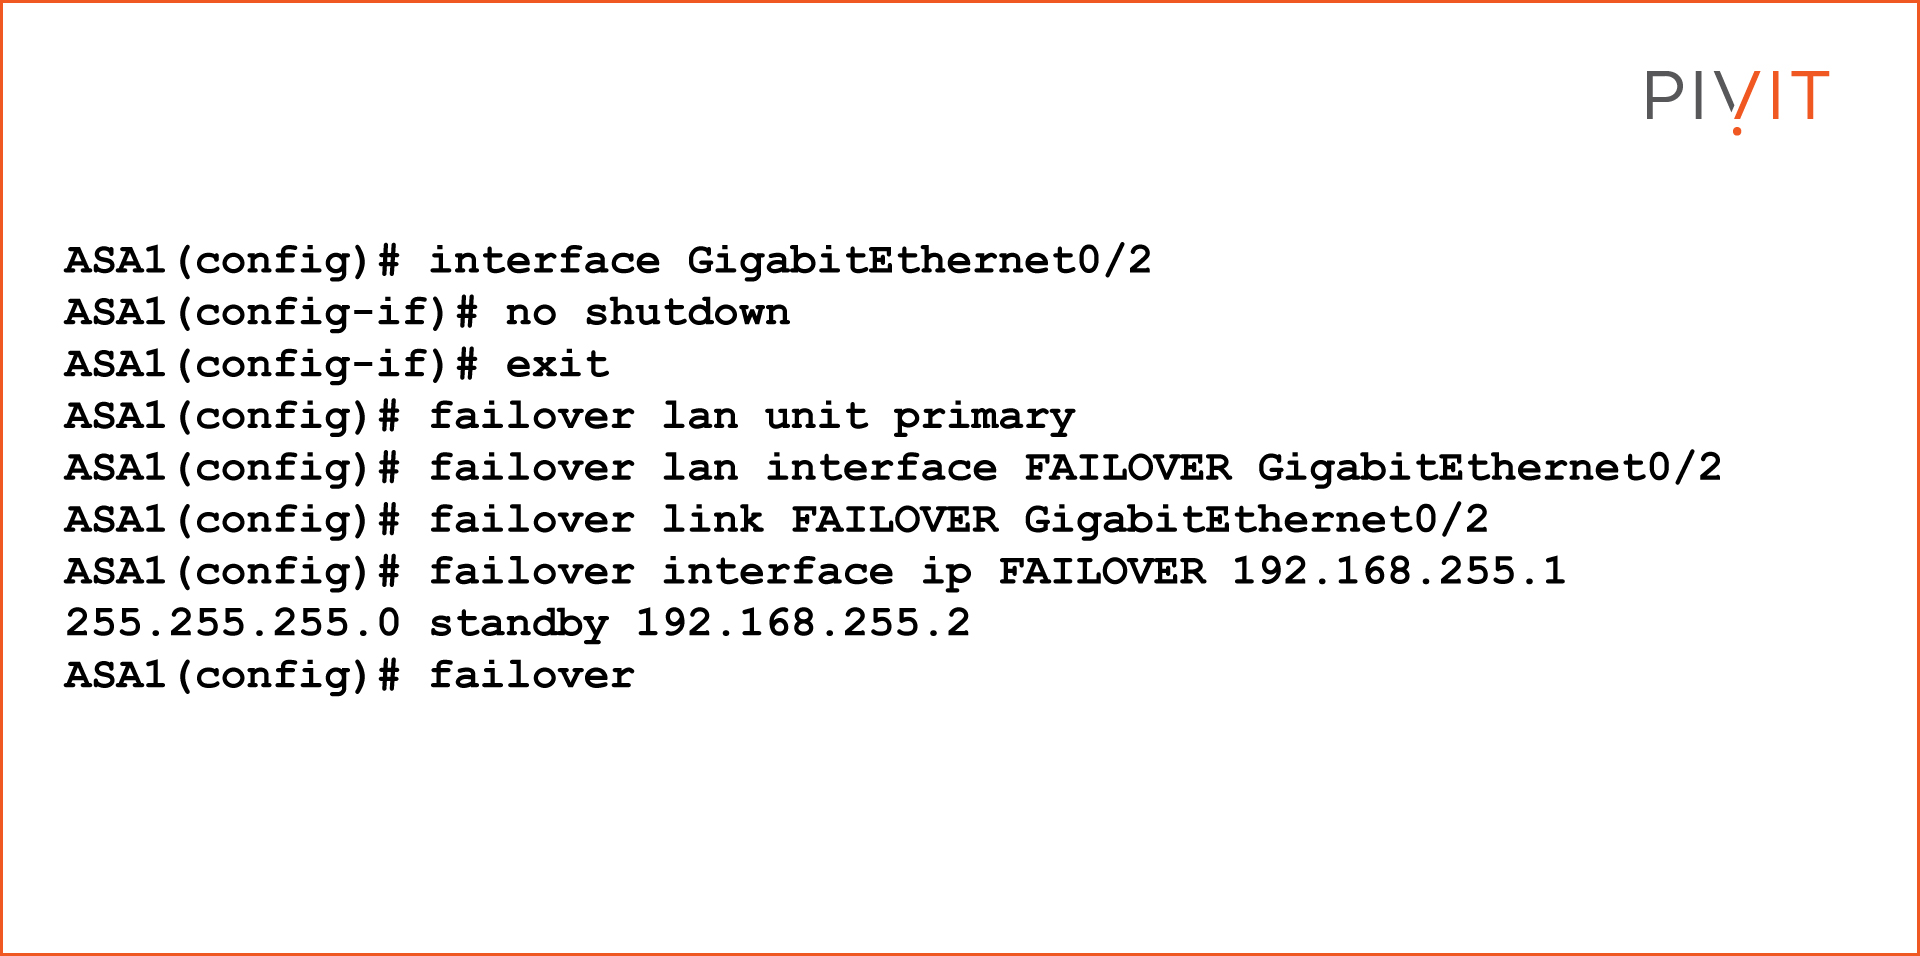 Commands to Configure the Active/Standby Failover on the Primary Device